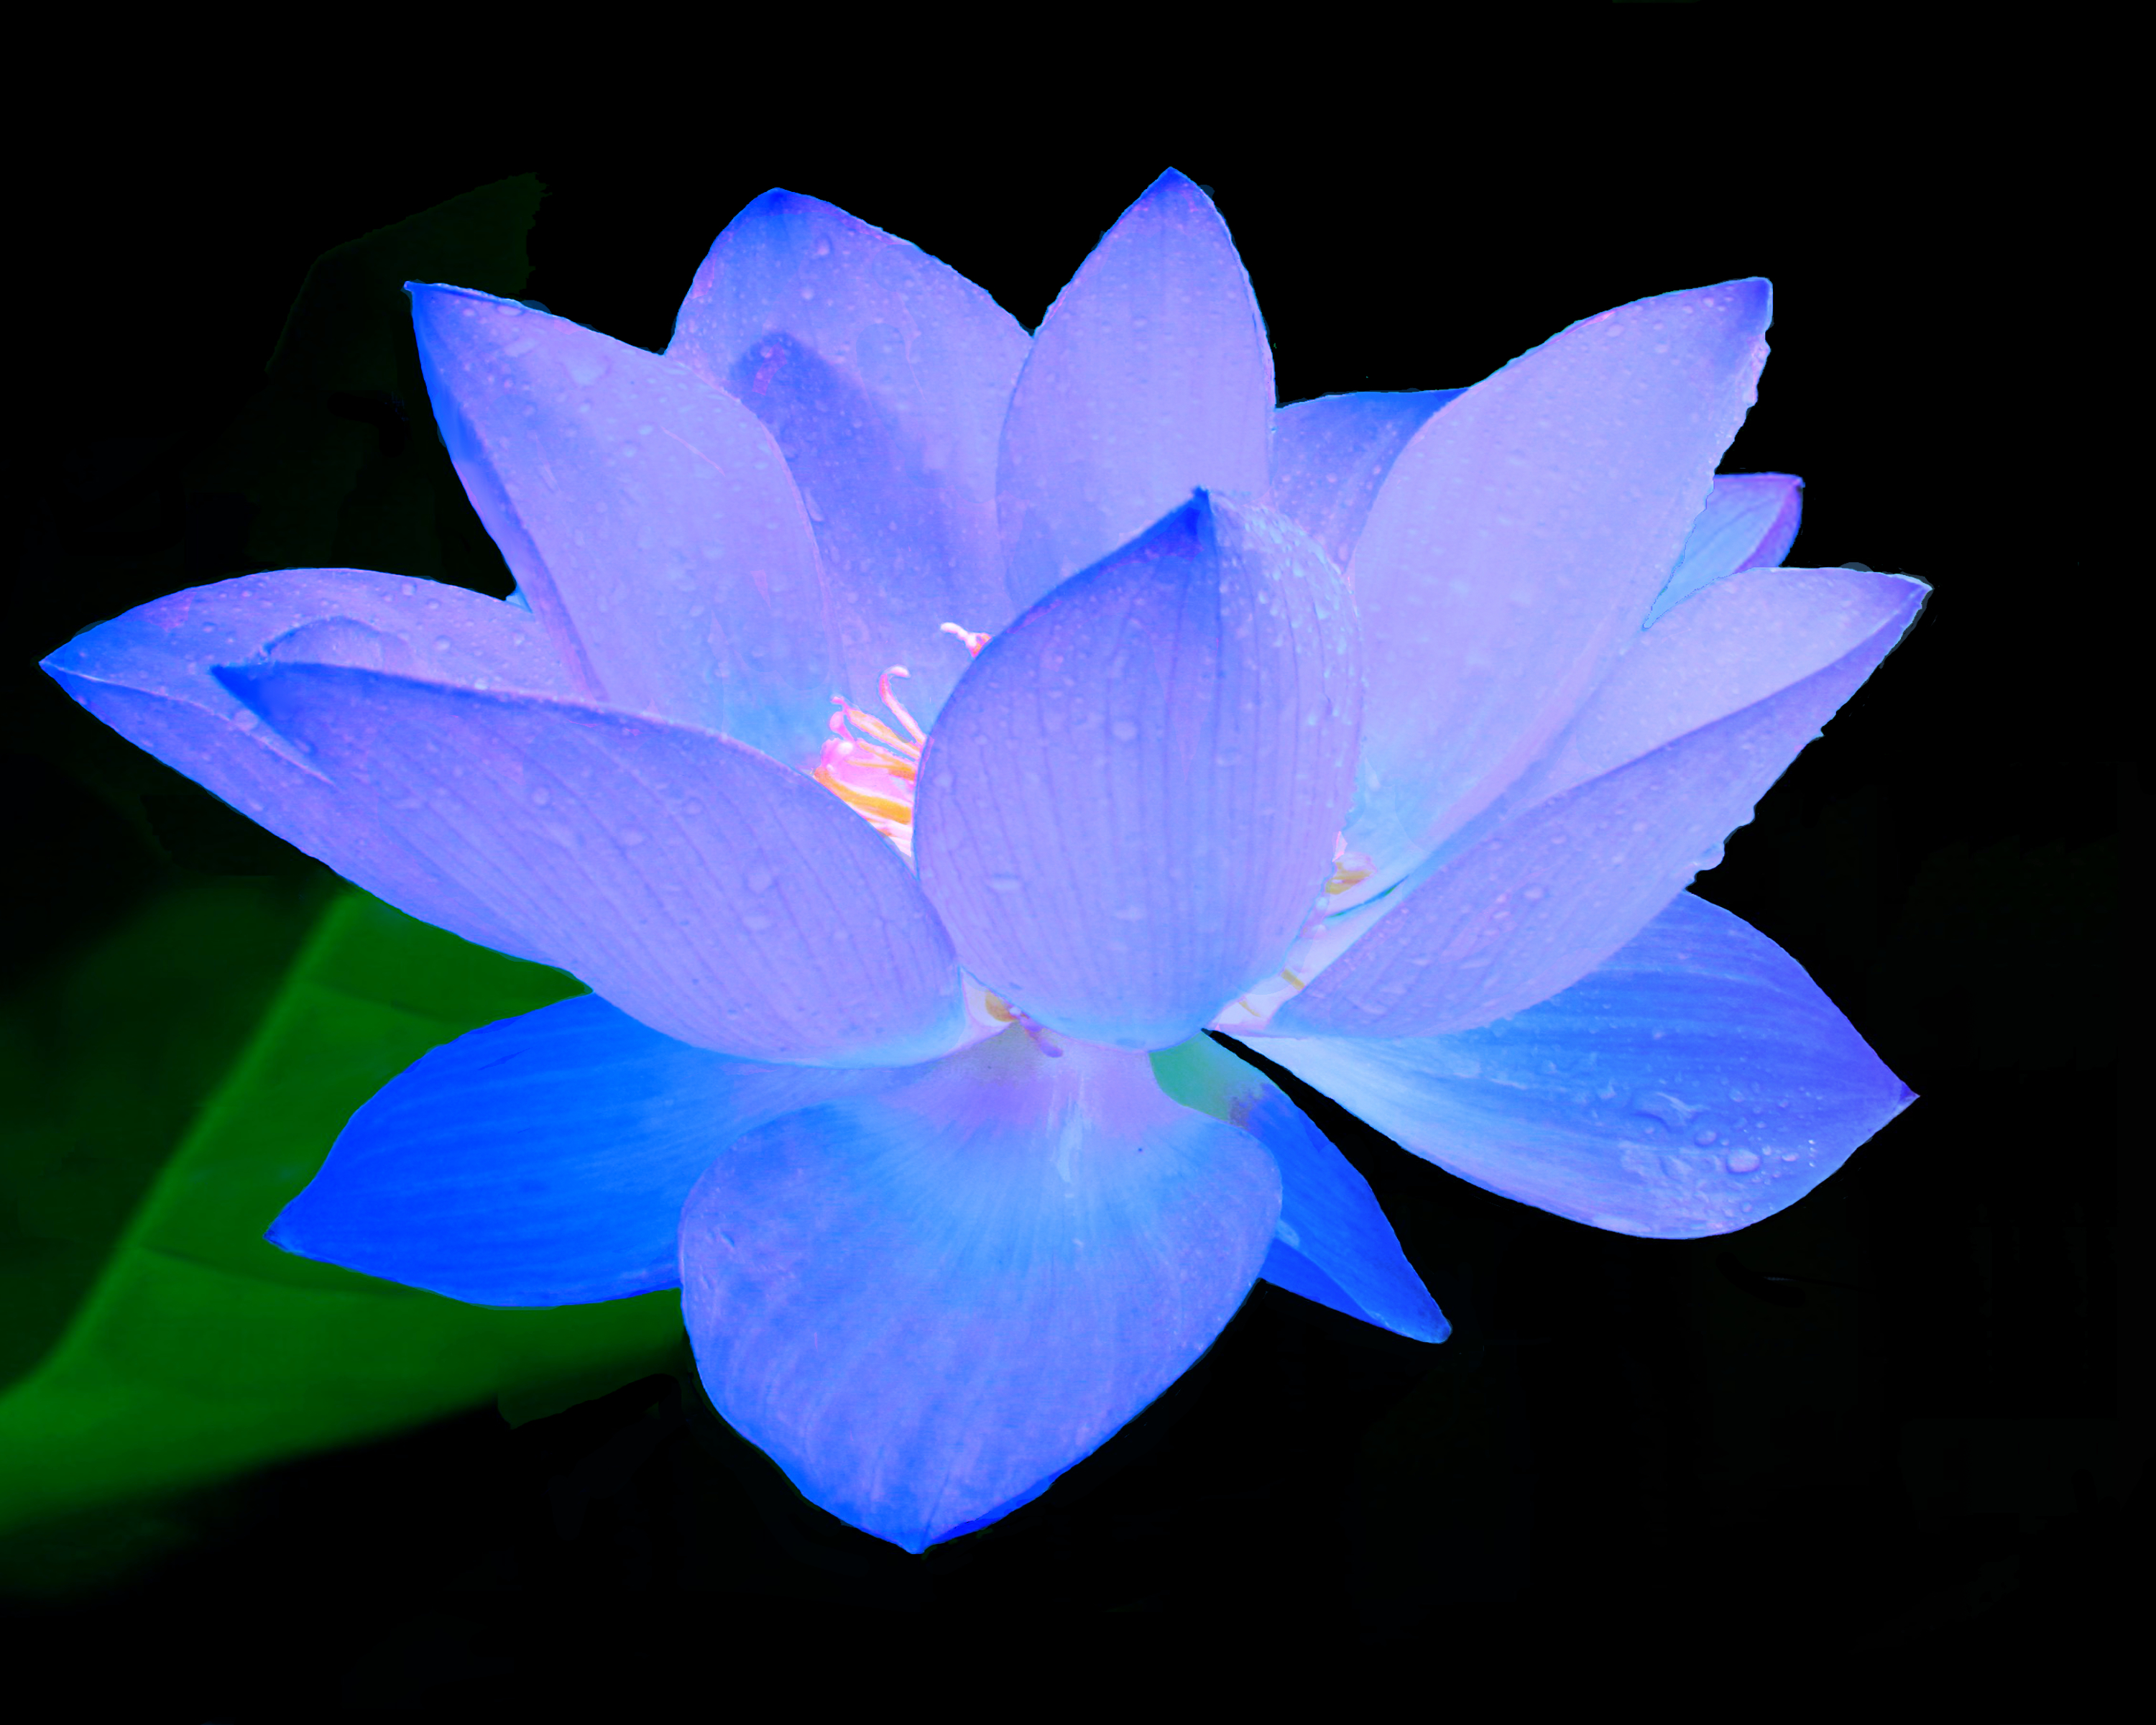 Blue Lotus - Share your work - Affinity